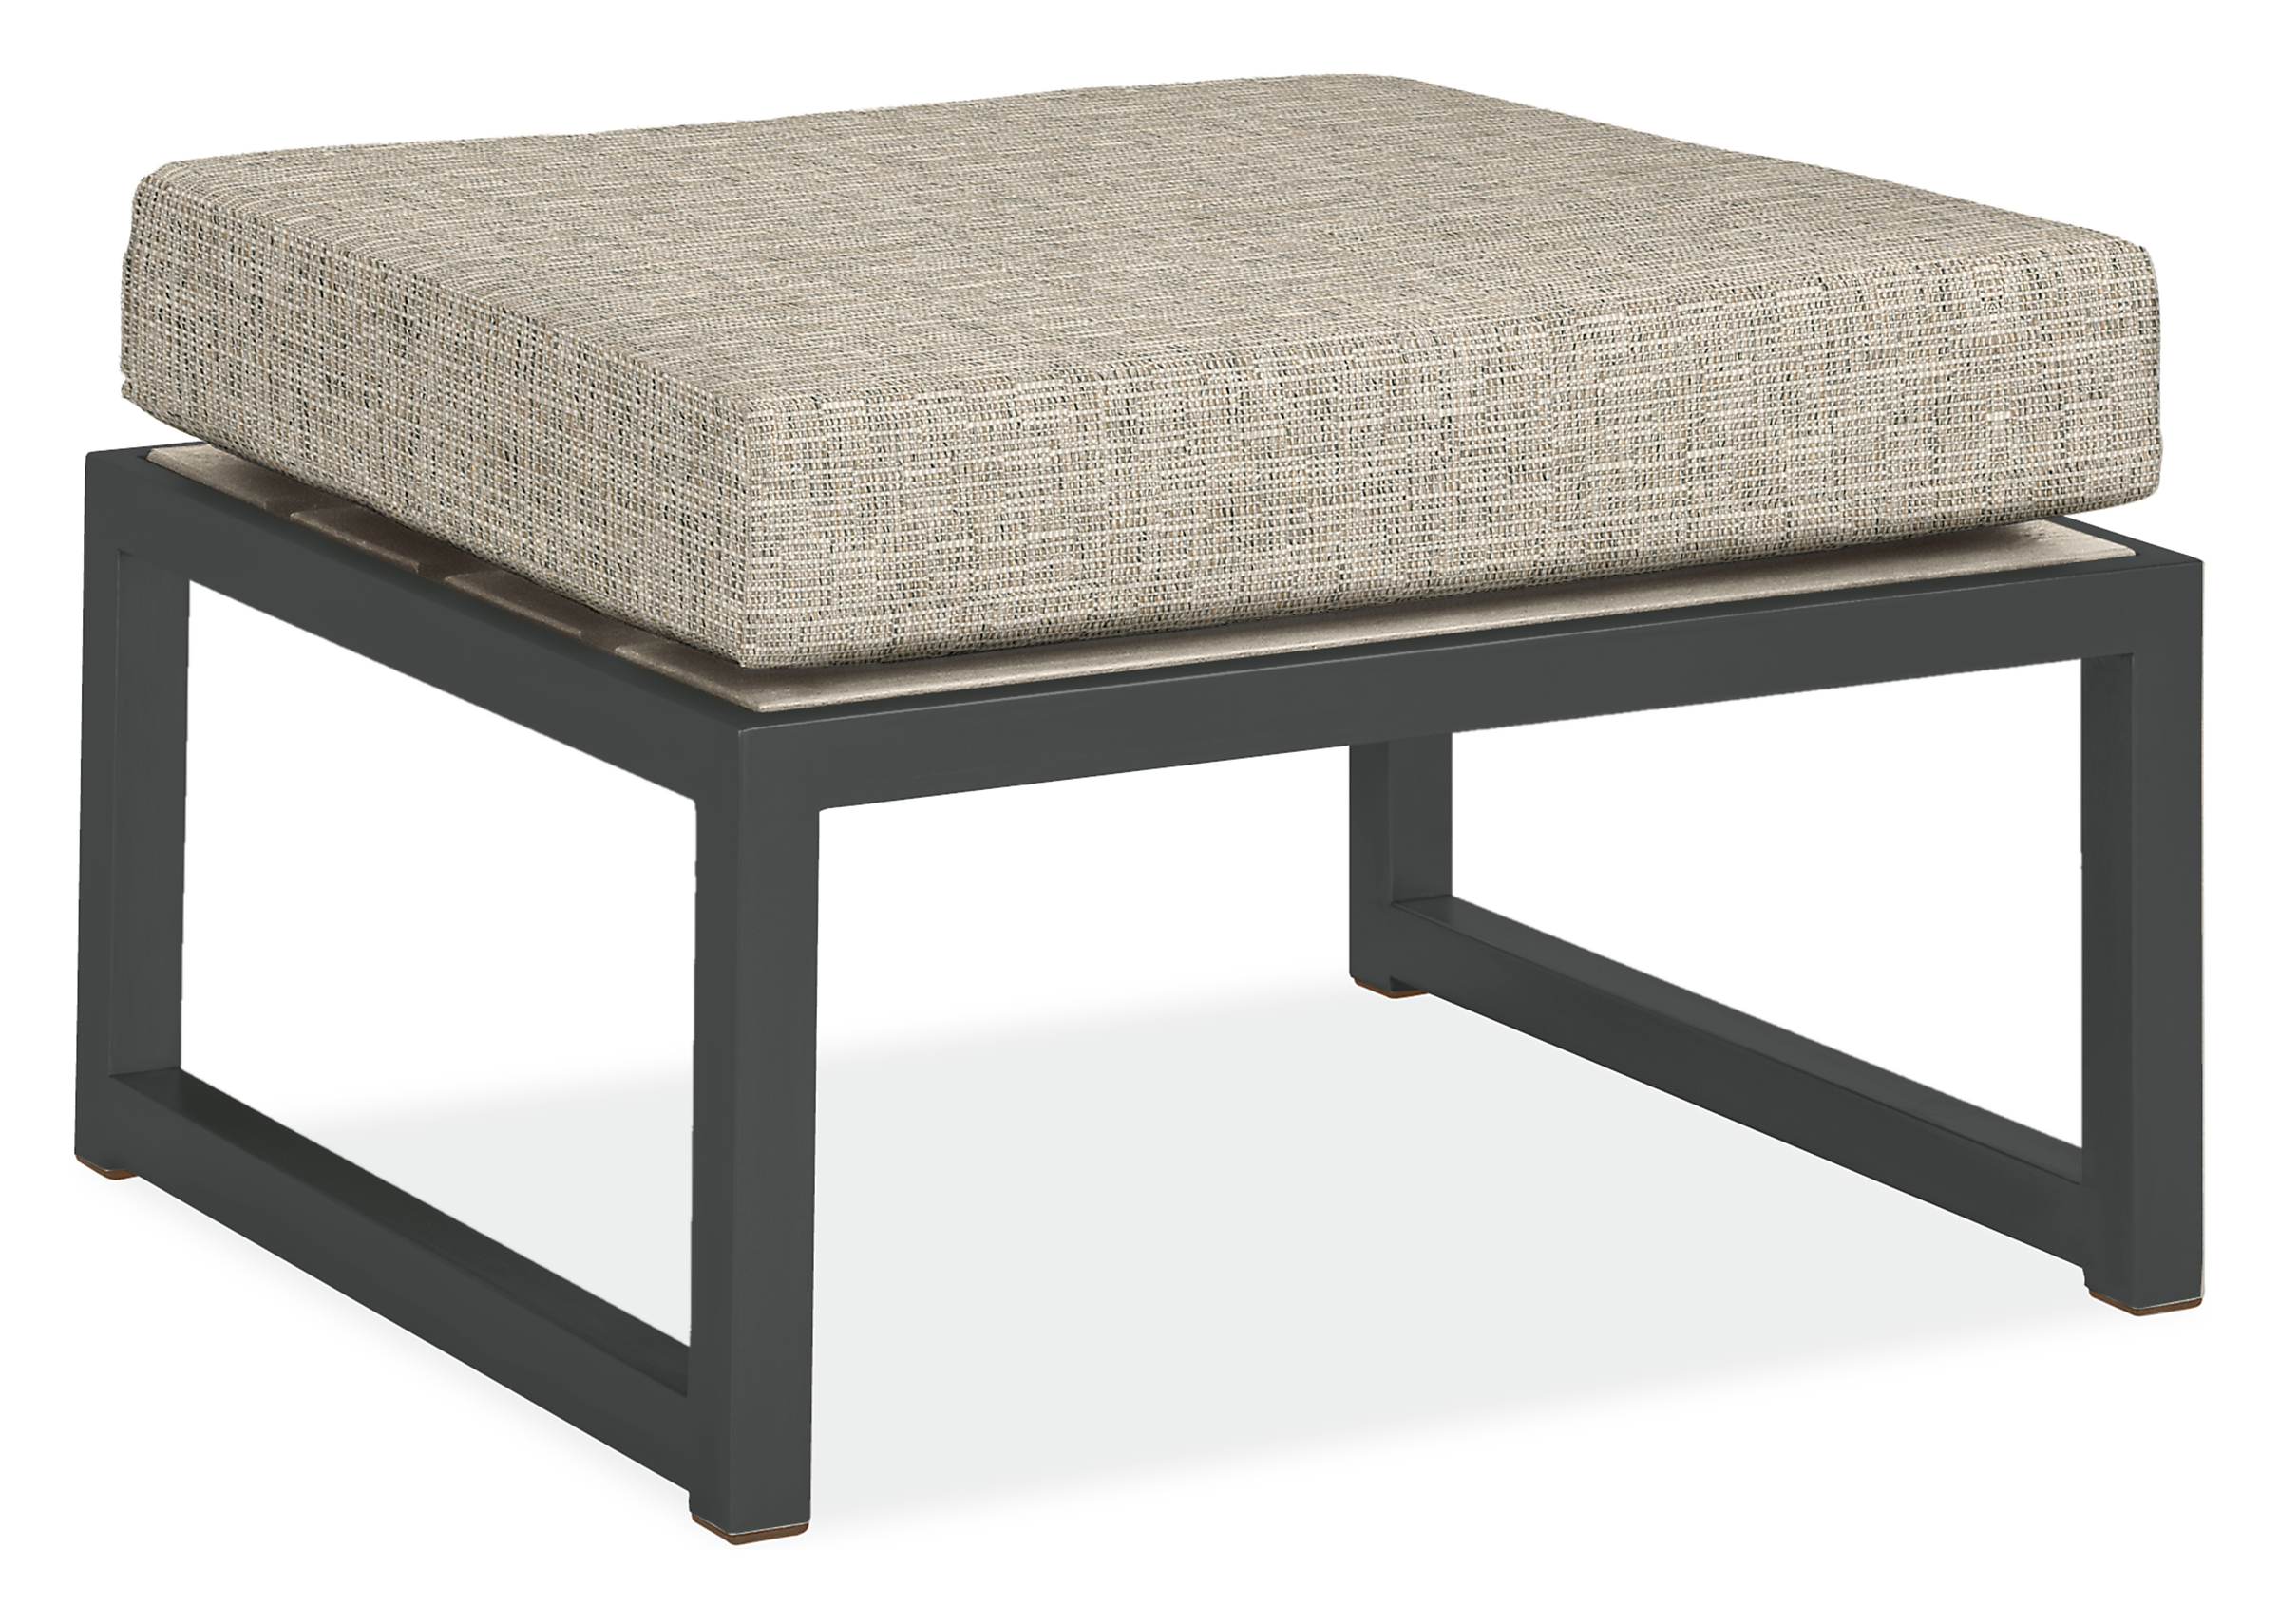 Montego 29w 25d 13h Ottoman in Thermally Modified Ash w/Cushion